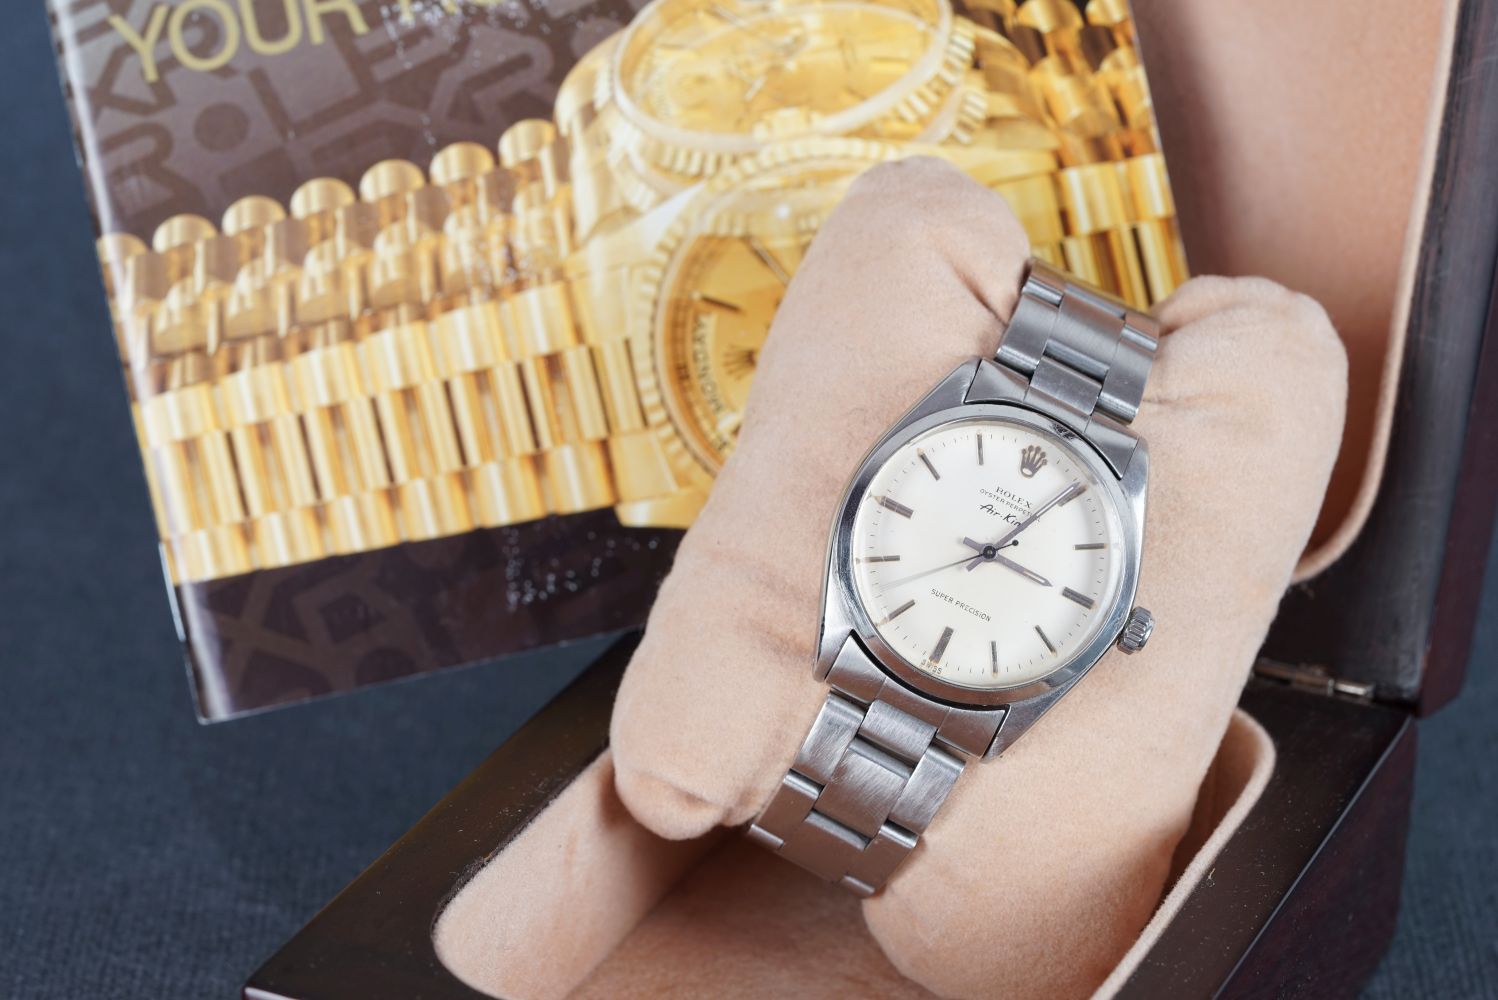 GENTLEMENS ROLEX OYSTER PERPETUAL AIRKING WRISTWATCH REF. 5500, circular cream dial with silver hour